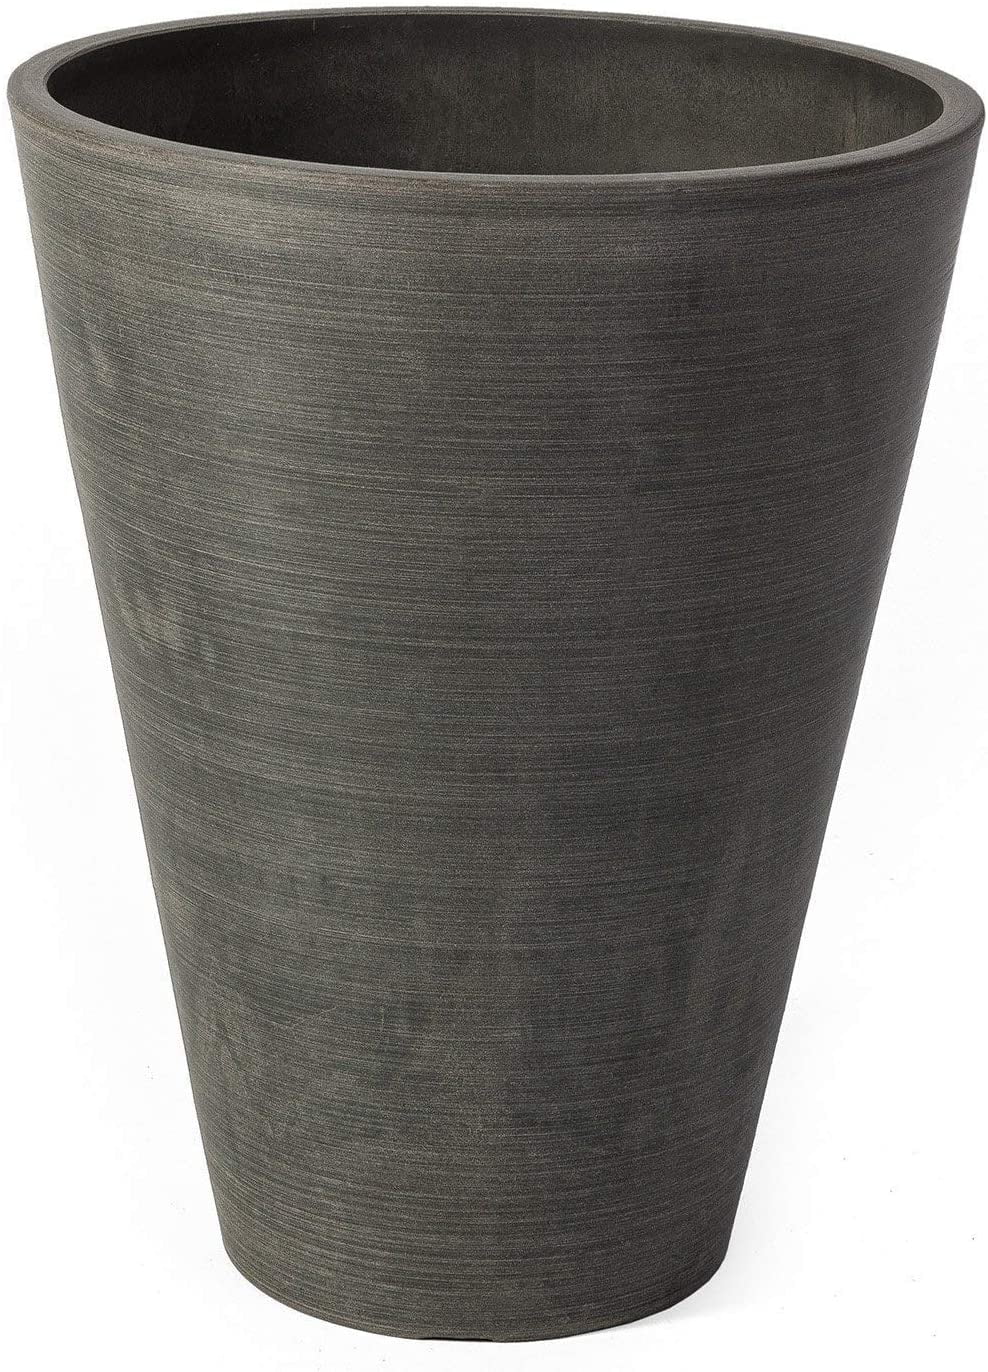 16230 18 X 12.5 X 12.5 In. Valencia Round Planter Pot, Textured Charcoal